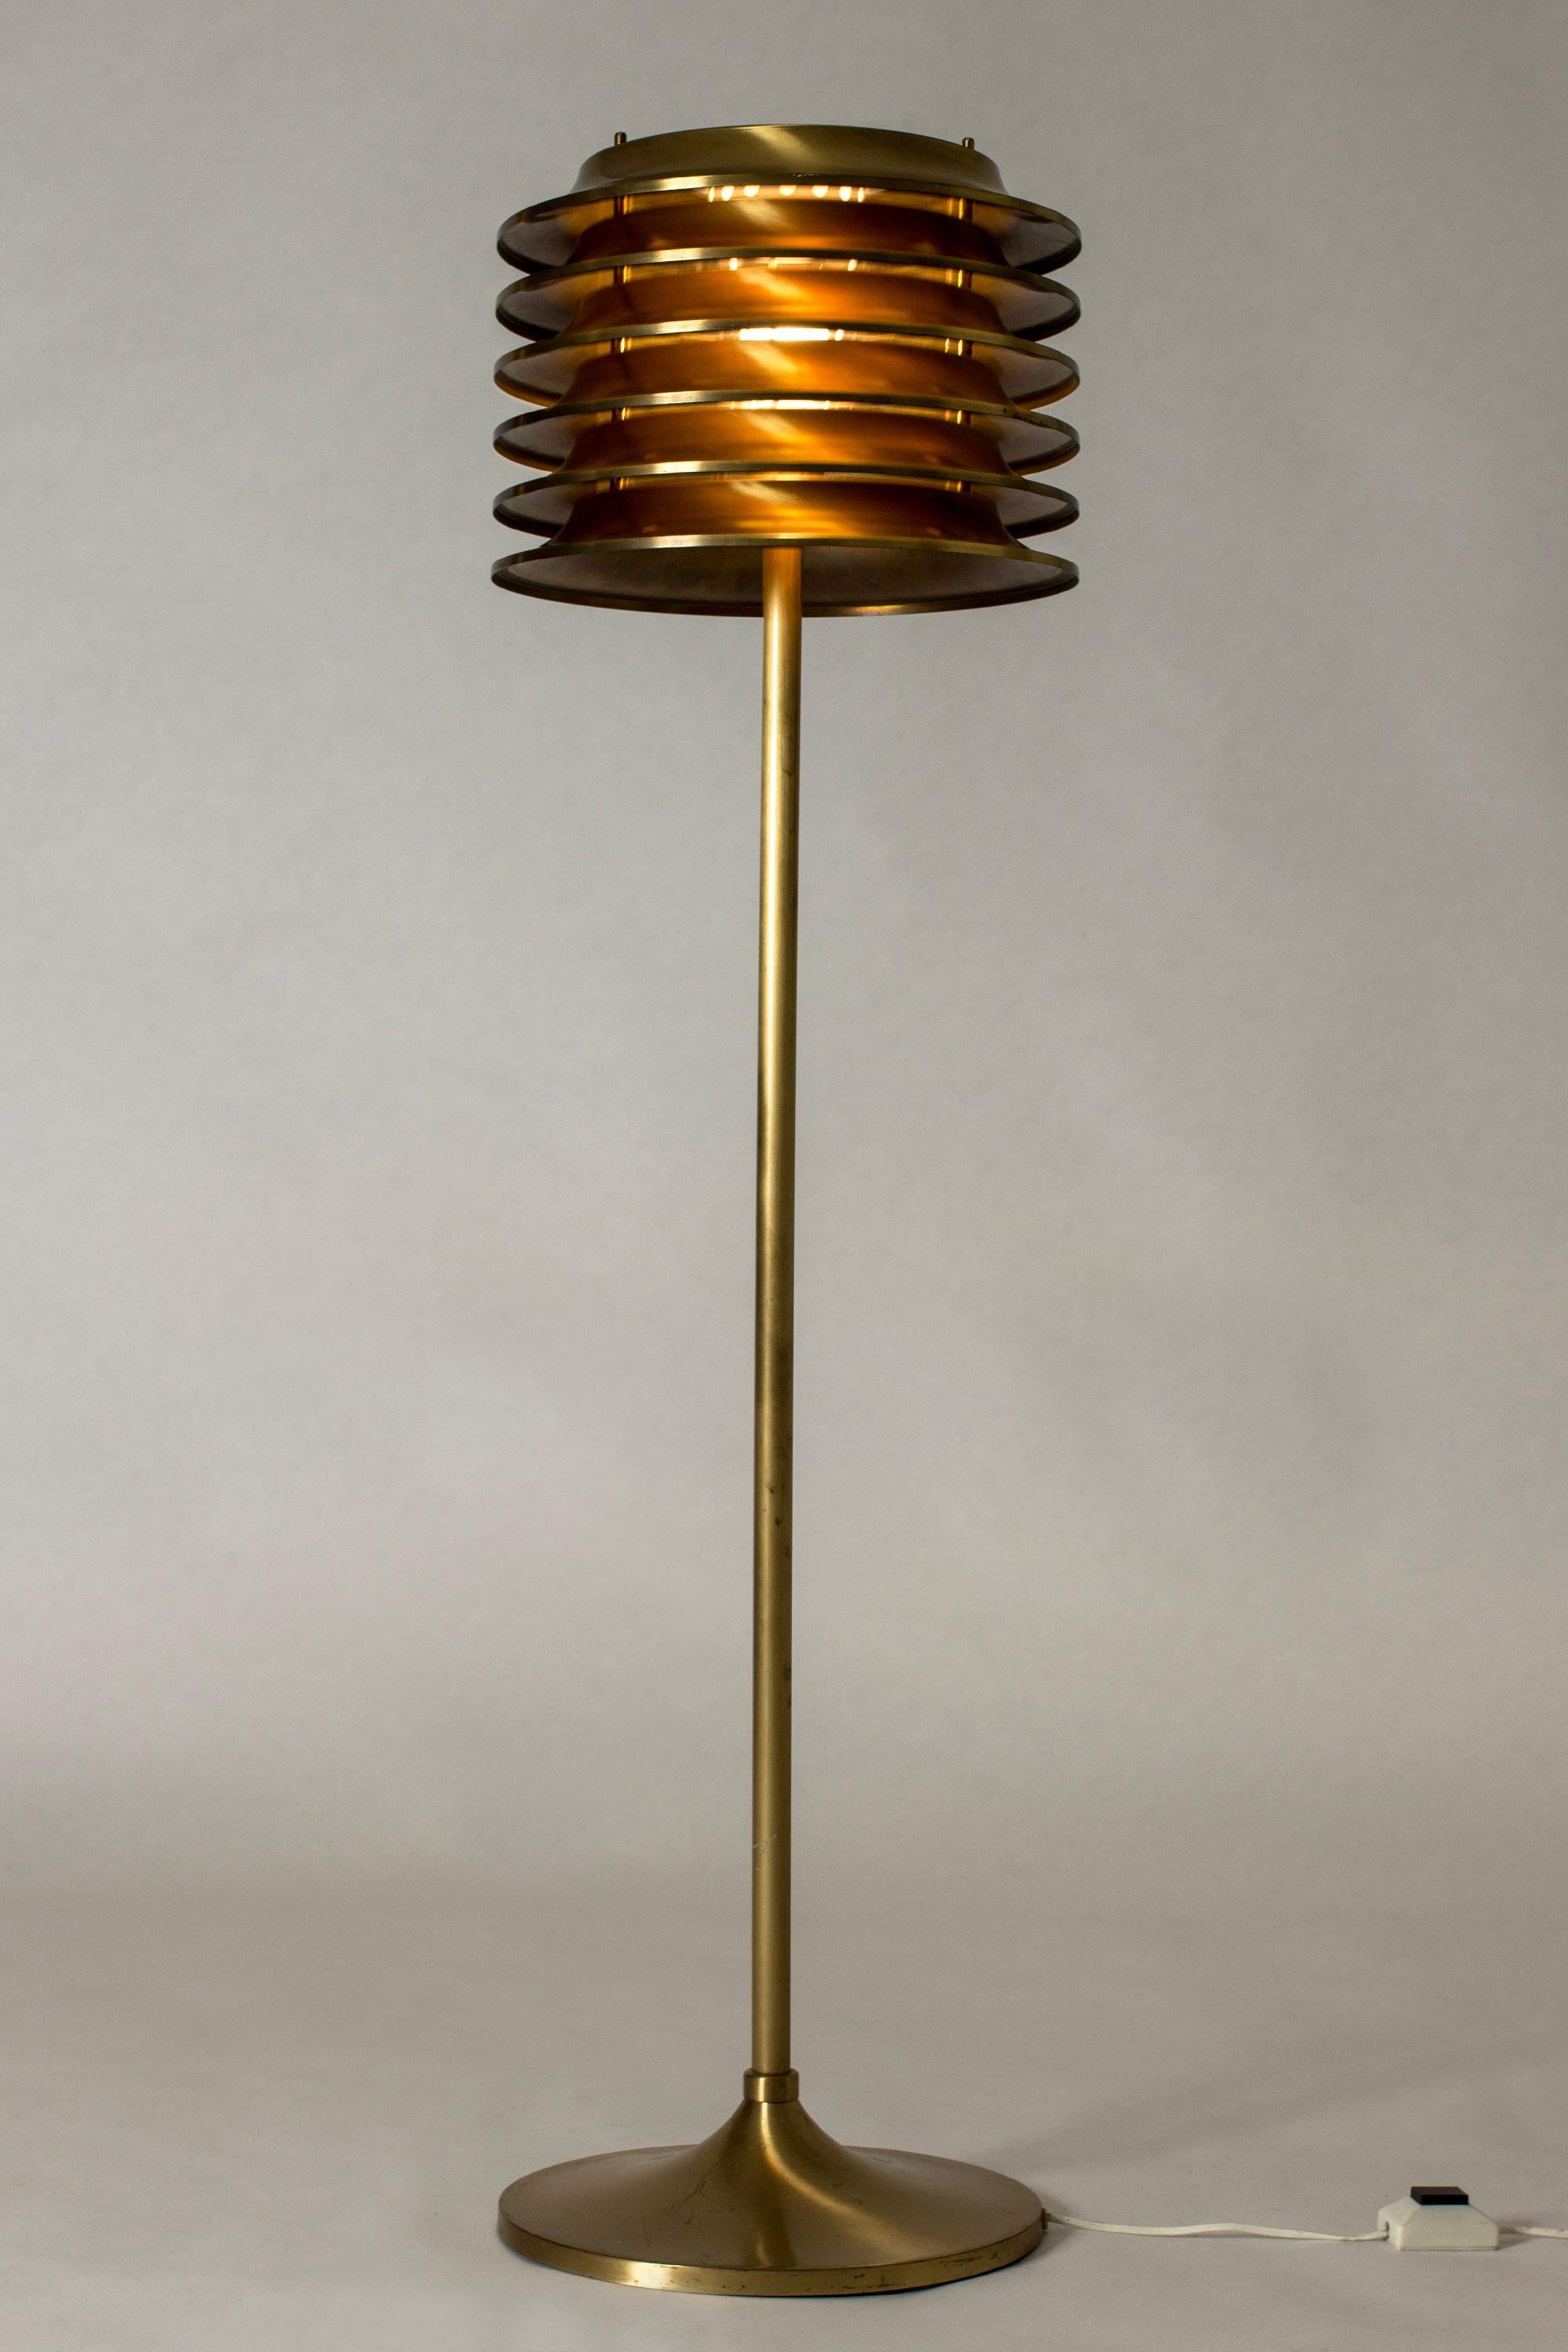 Very cool brass floor lamp by Kai Ruokonen, with a large lamella lamp shade. Sends out beautiful, warm light when lit.